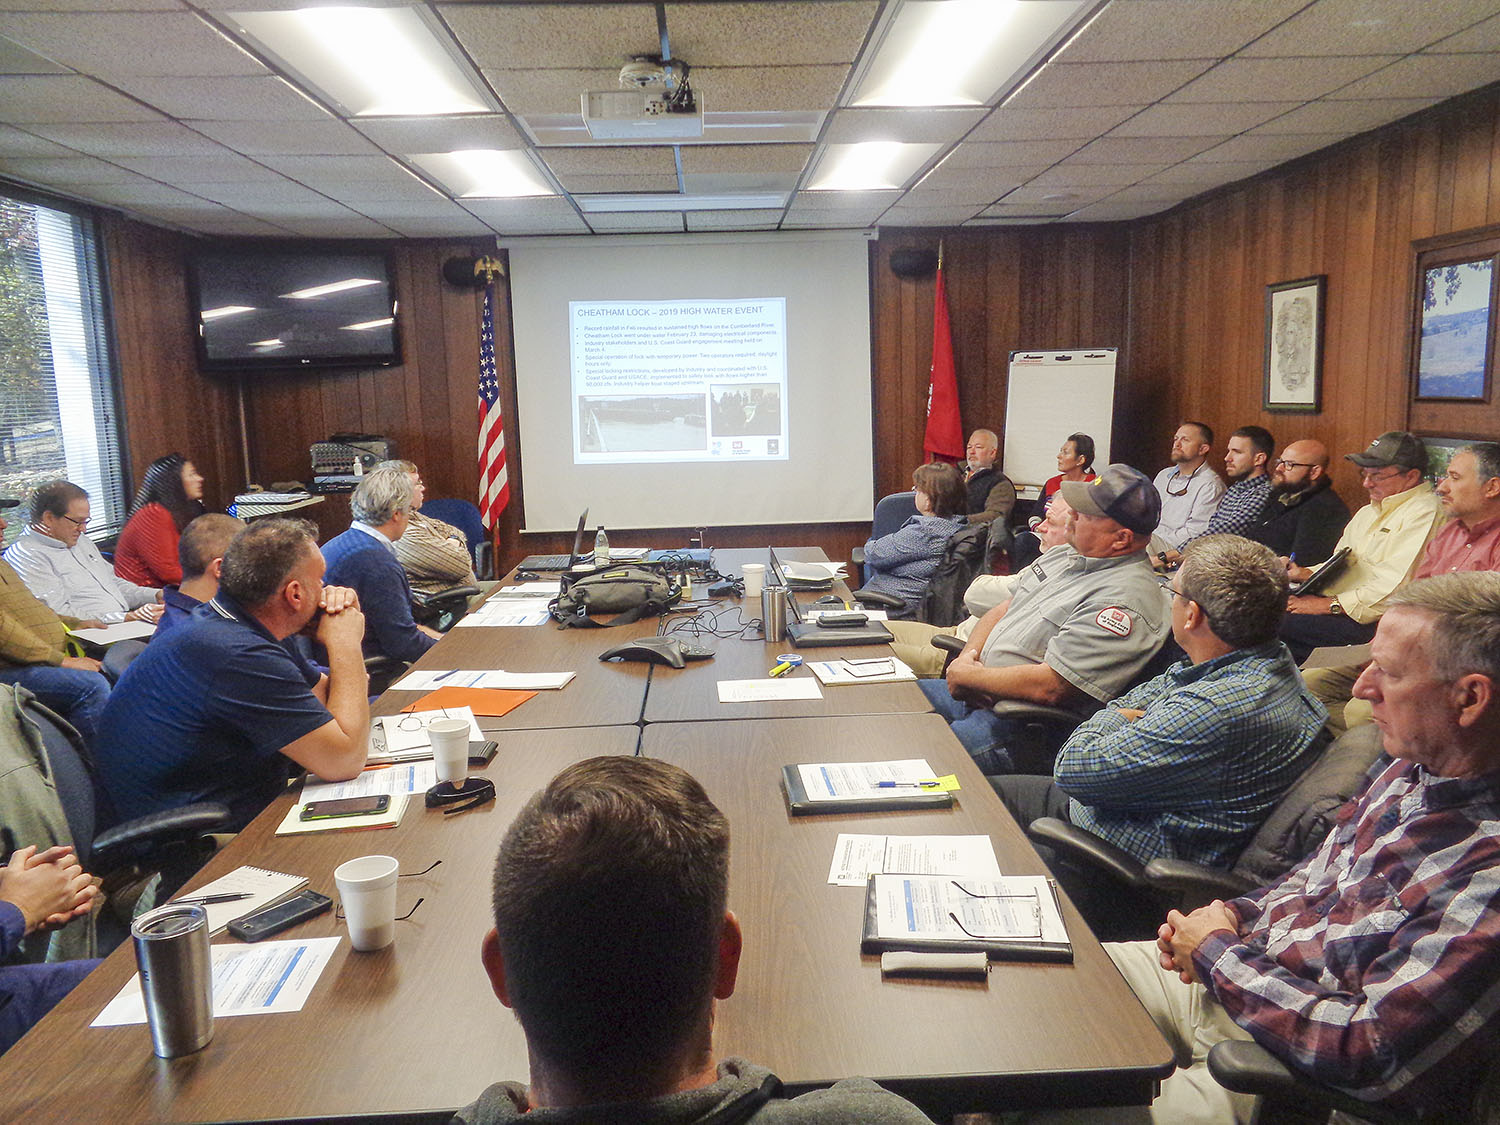 More than 30 people crowd into a meeting room at the Lake Barkley Resource Manager’s Office Nov. 14 for the Fall Semi-Annual Navigation Meeting. The meeting included timetables for construction projects that could affect navigation on the inland waterways. (Photo by Shelley Byrne)